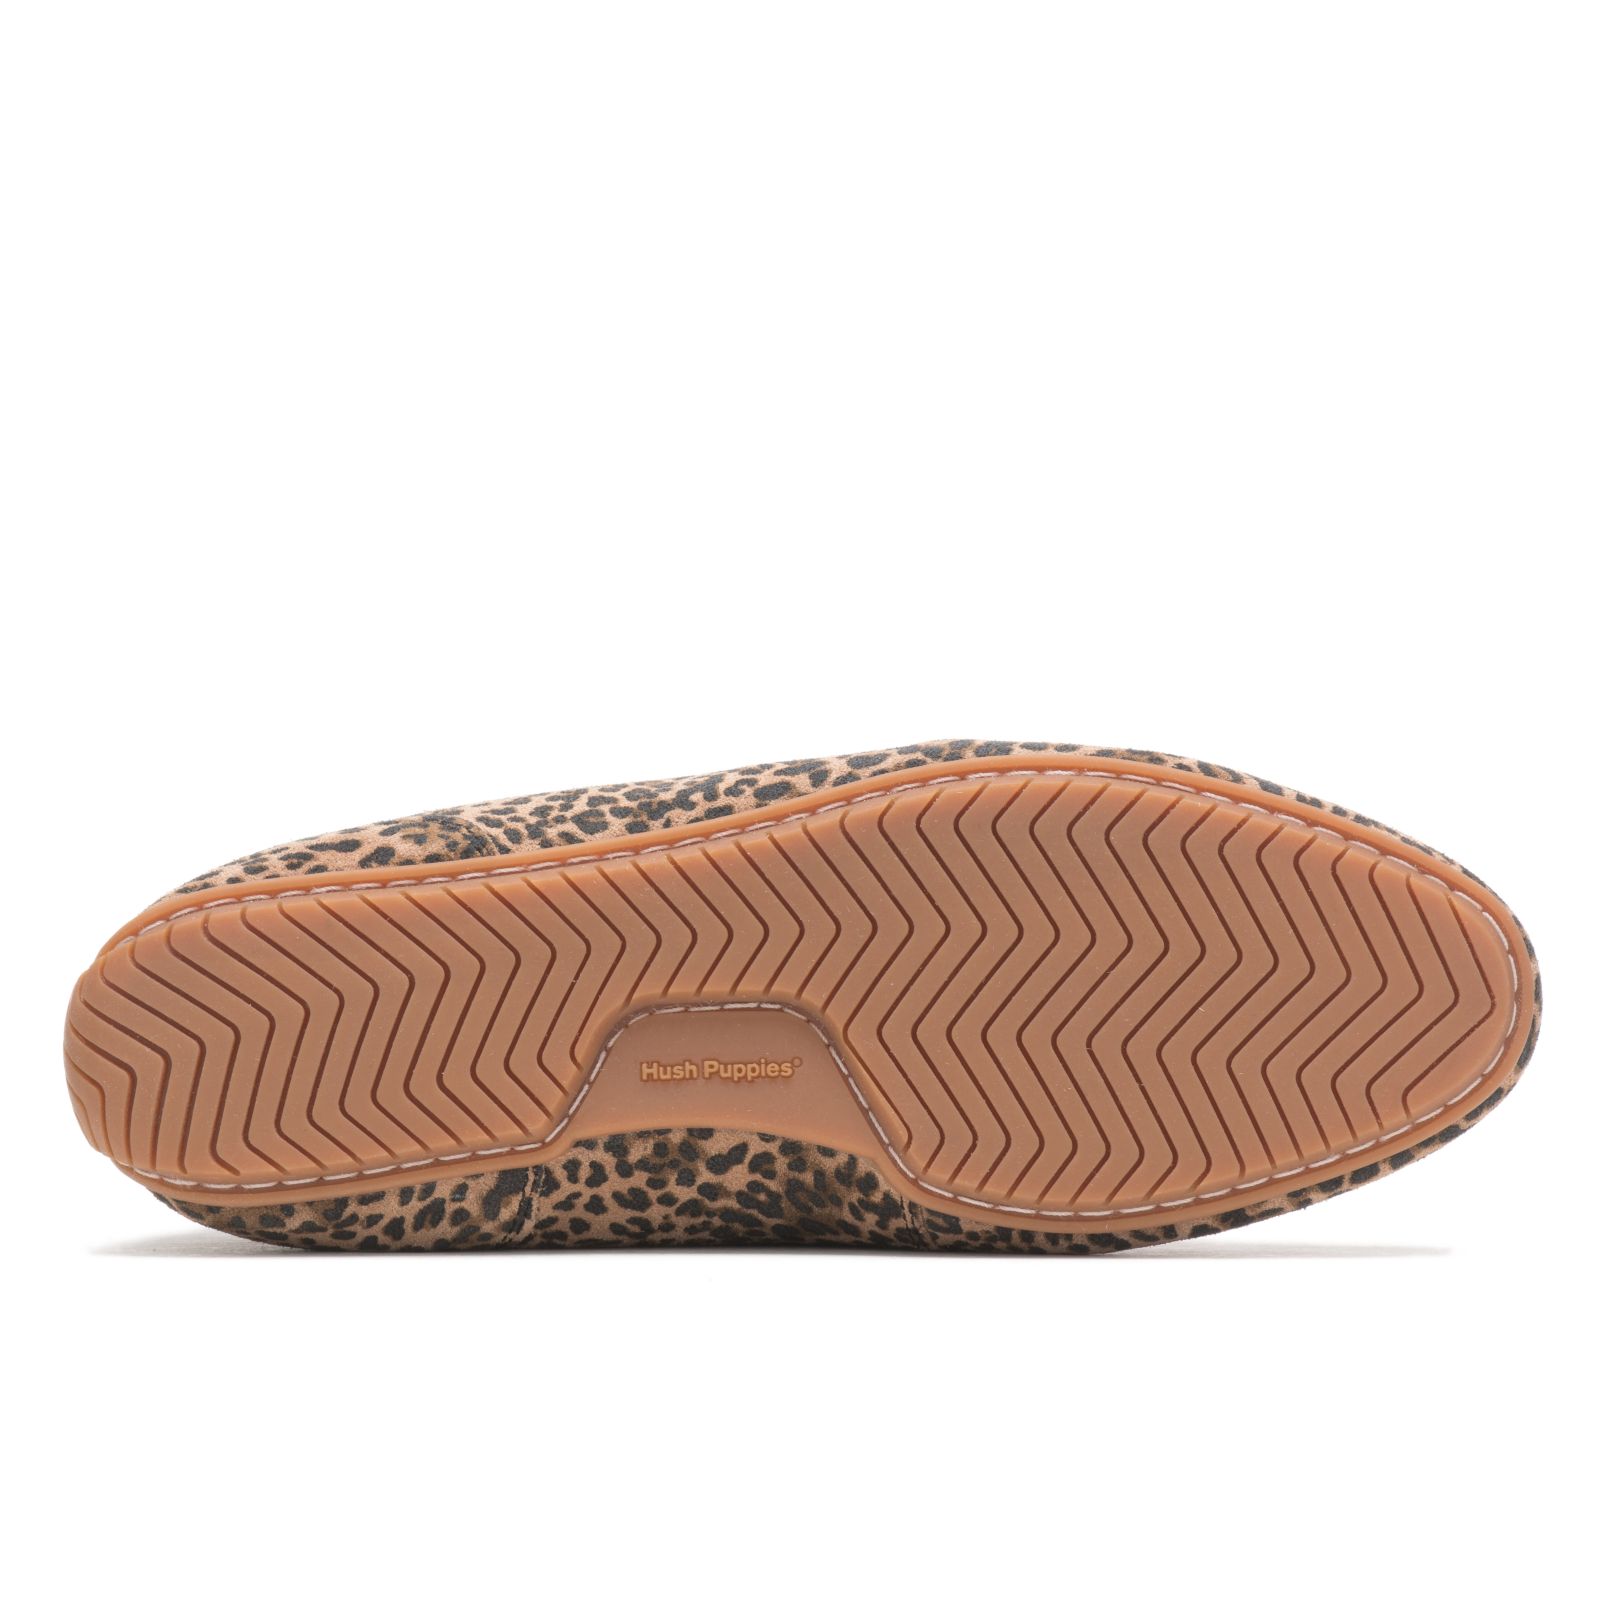 Loafers Hush Puppies Cora Mujer Leopardo | TIGXEYA-63